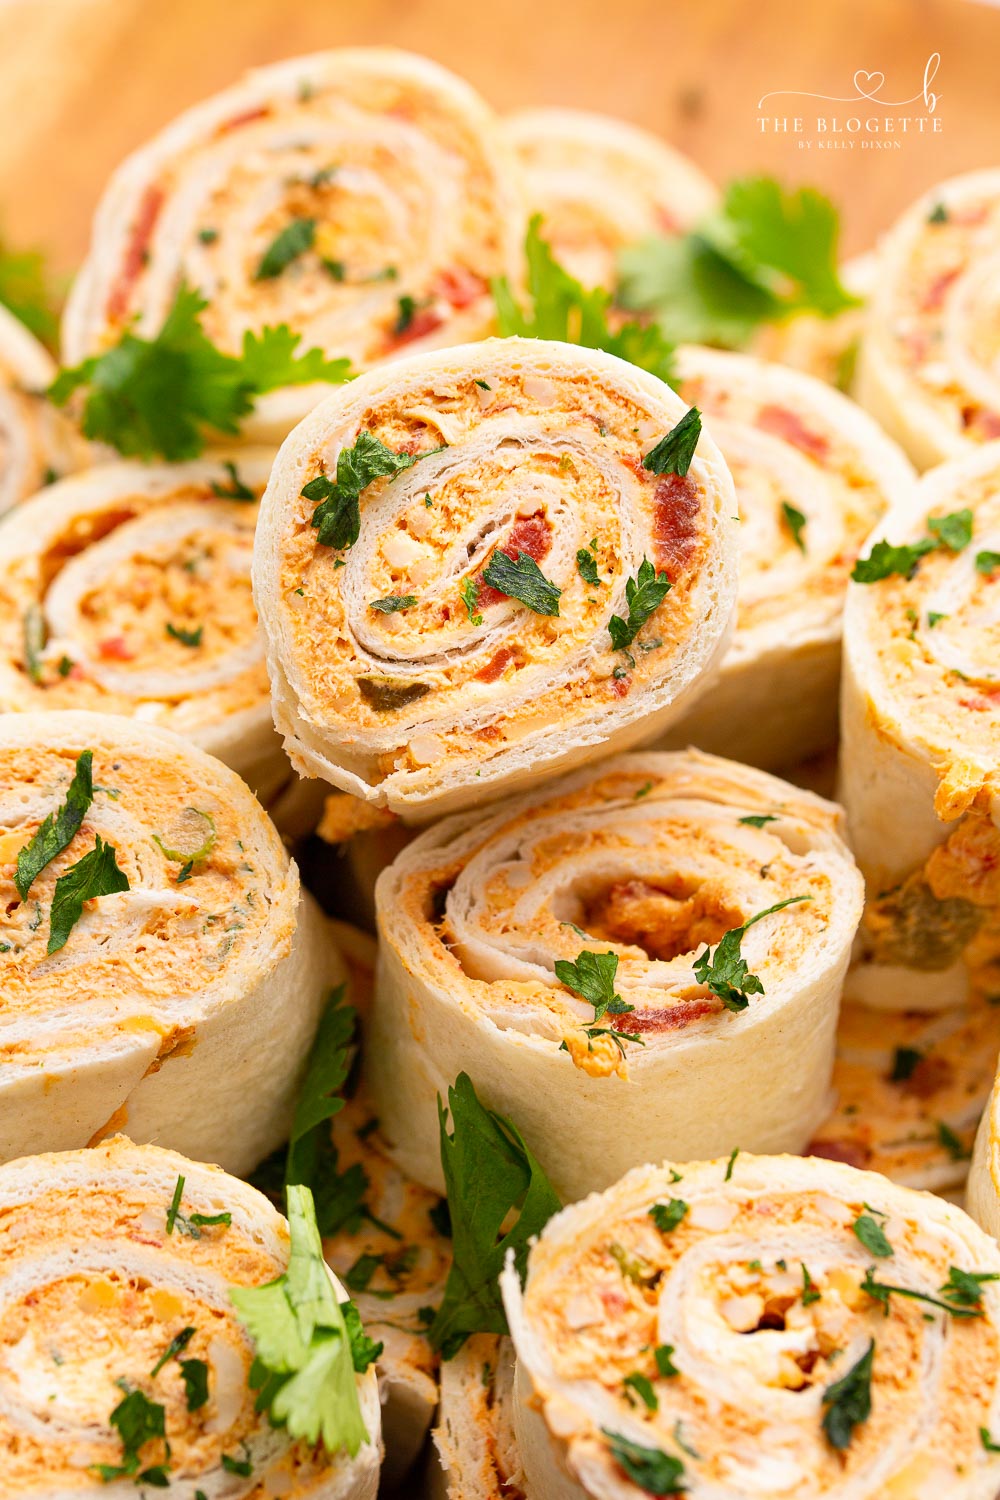 Chicken Enchilada Roll Ups are the perfect appetizer or snack for any party or occasion. This make-ahead appetizer is made with easy-to-find ingredients like taco seasoning, cream cheese, and shredded chicken (or leftover chicken!).